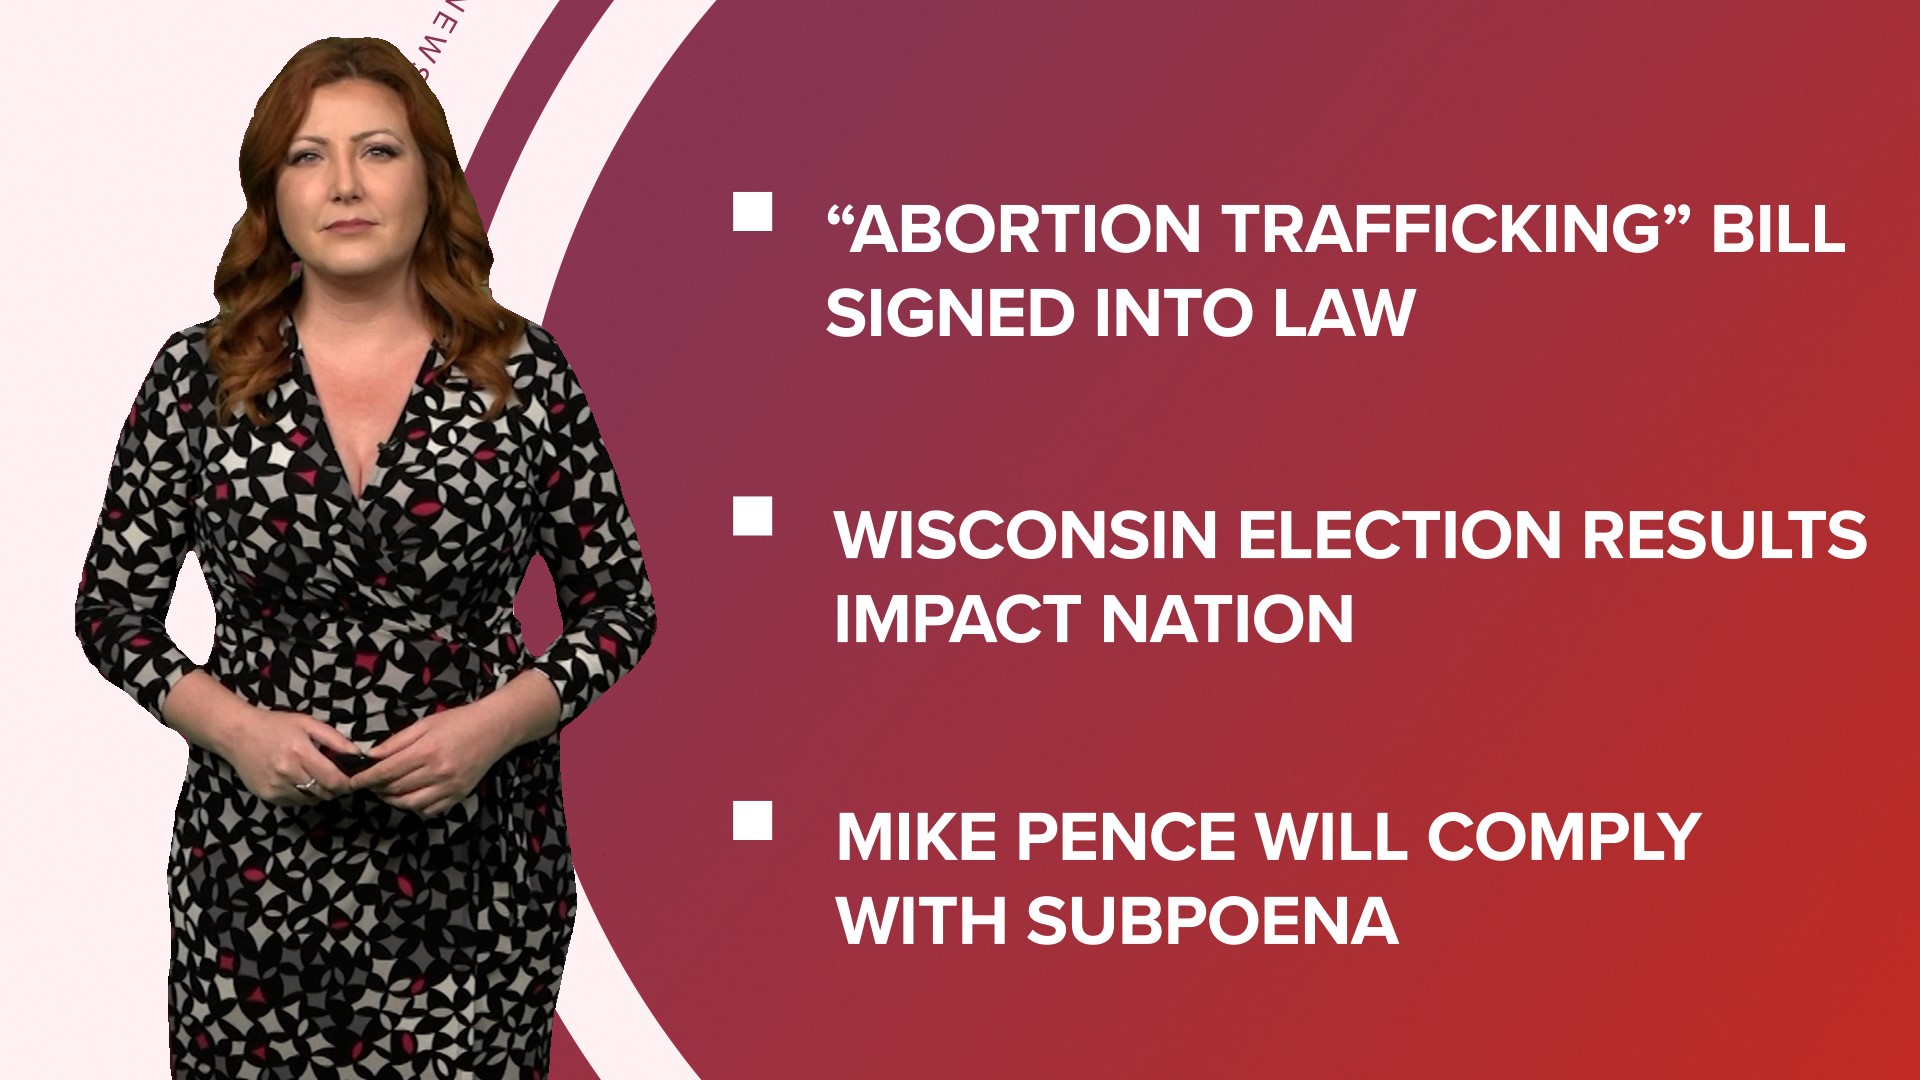 A look at what is happening in the news from an "abortion trafficking" law in Idaho to students protesting gun violence and 3 religious holidays observed this week.